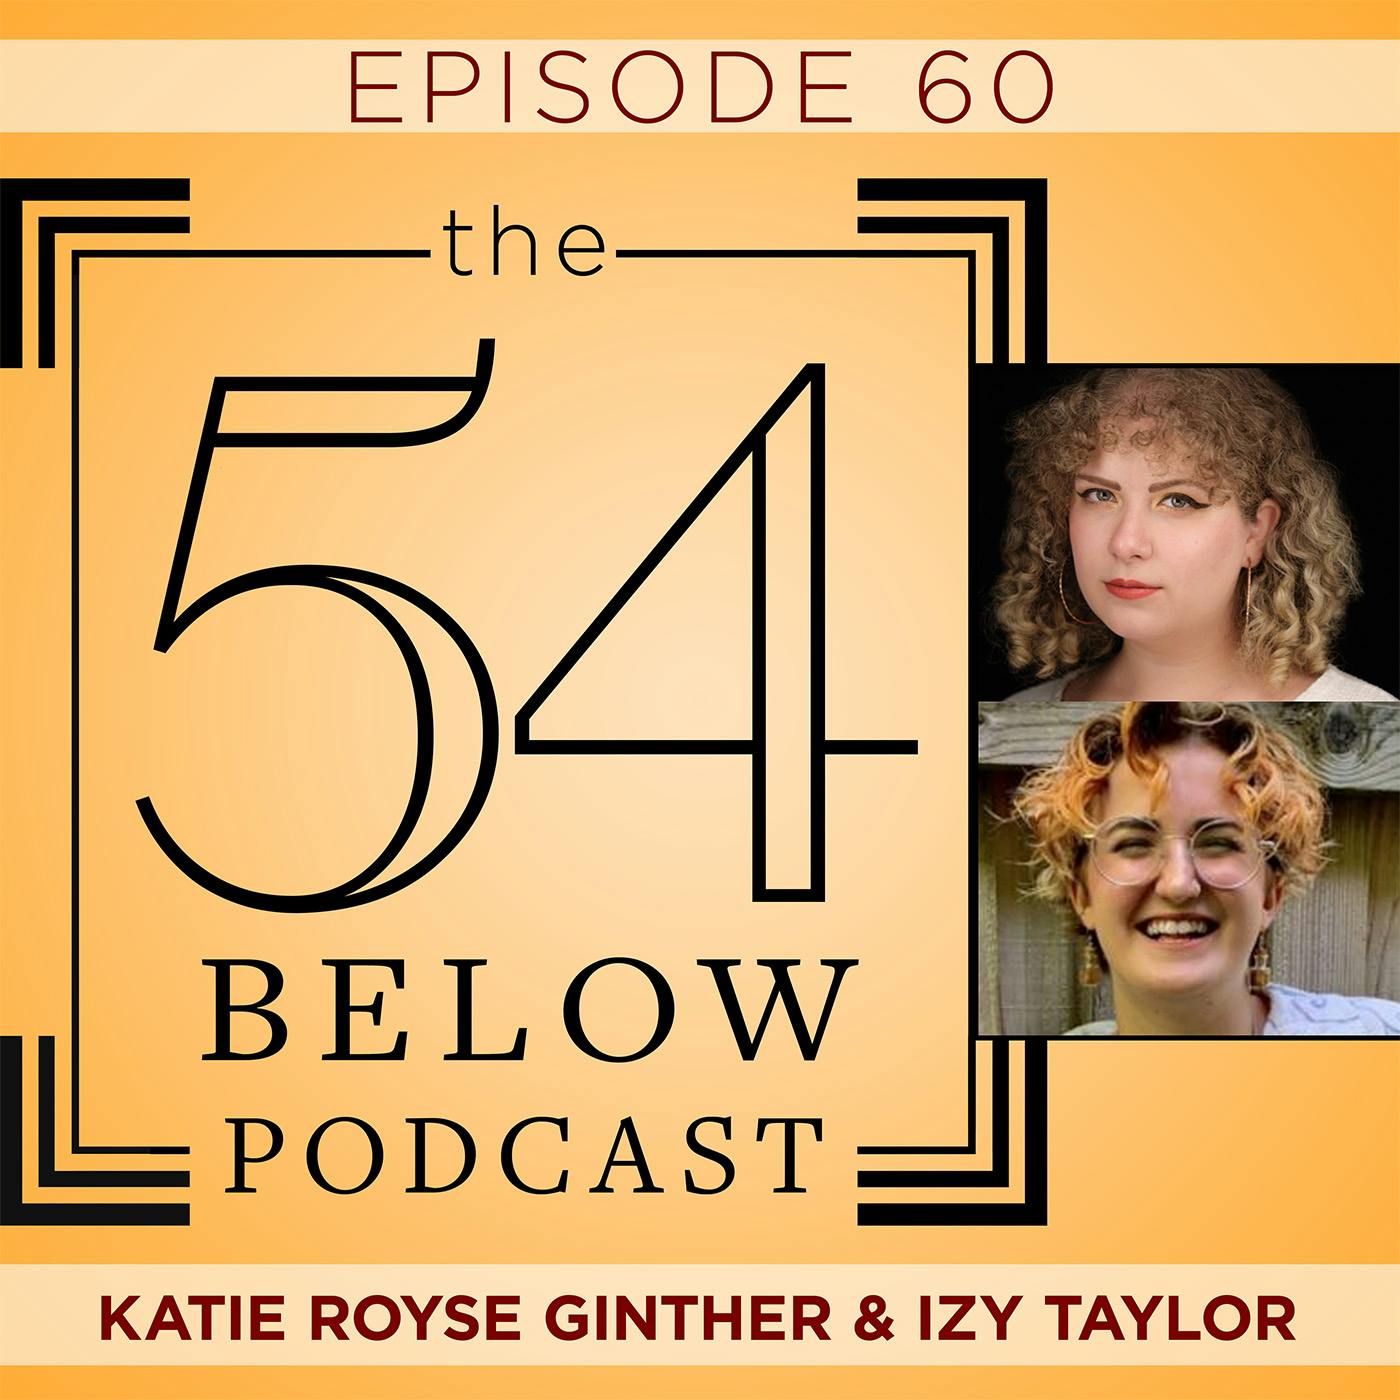 Episode 60: KATIE ROYSE GINTHER & IZY TAYLOR